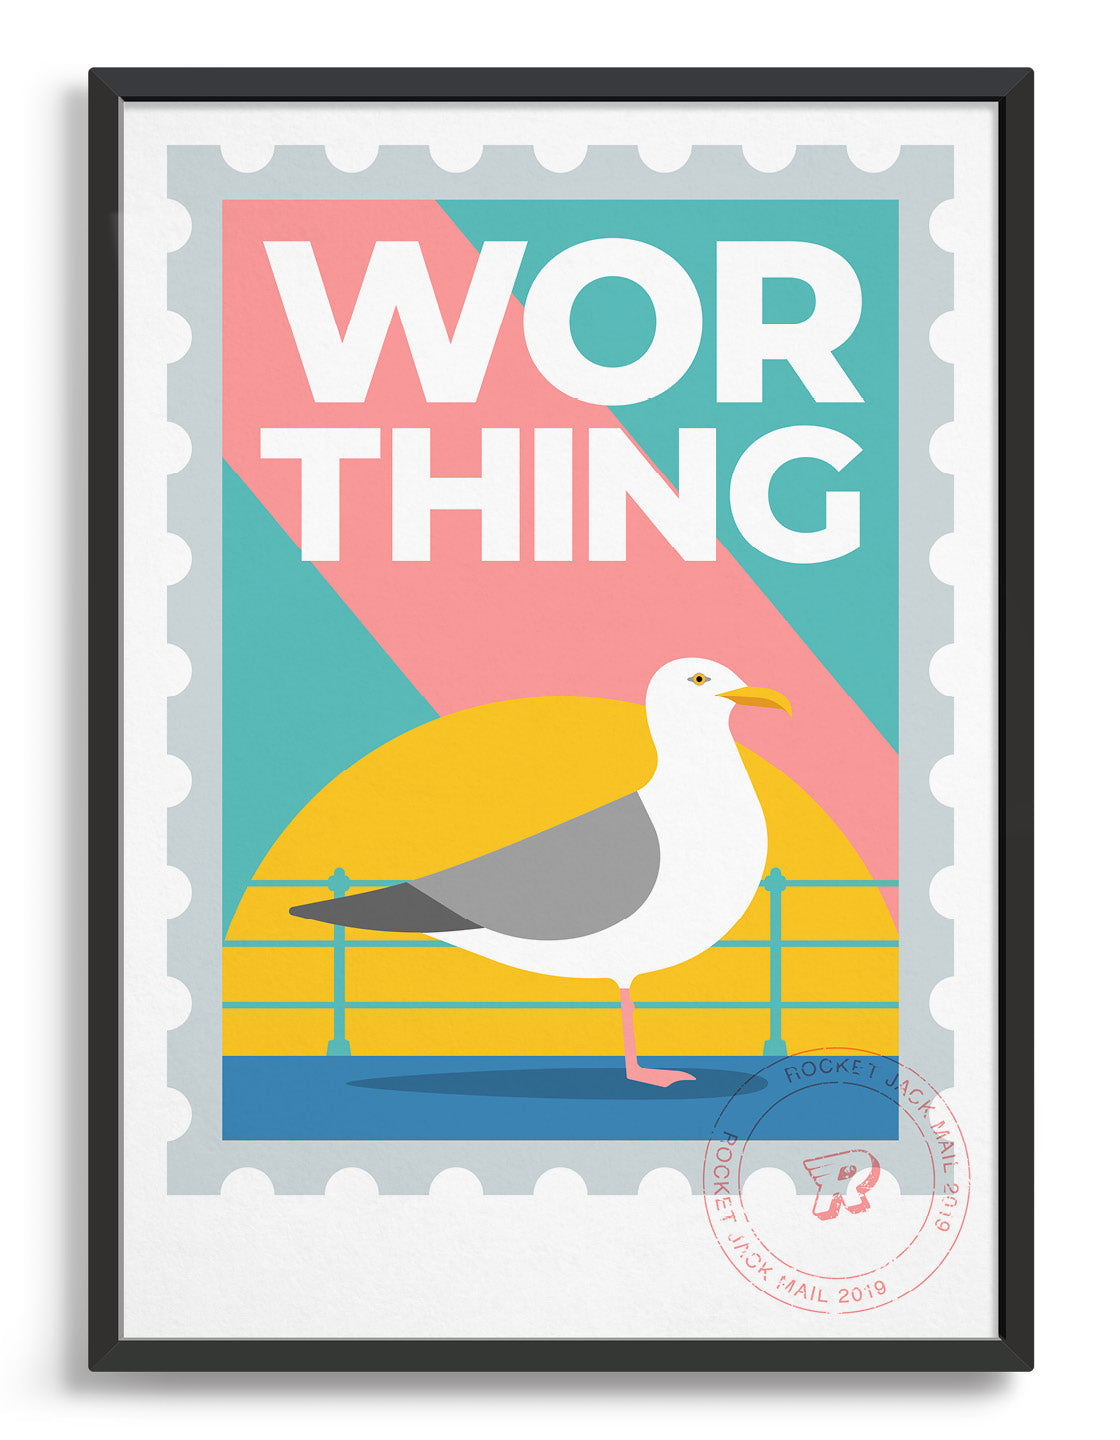 Worthing travel print in the style of a stamp. Features a seagull and promenade railing with bold Worthing text on a bright background